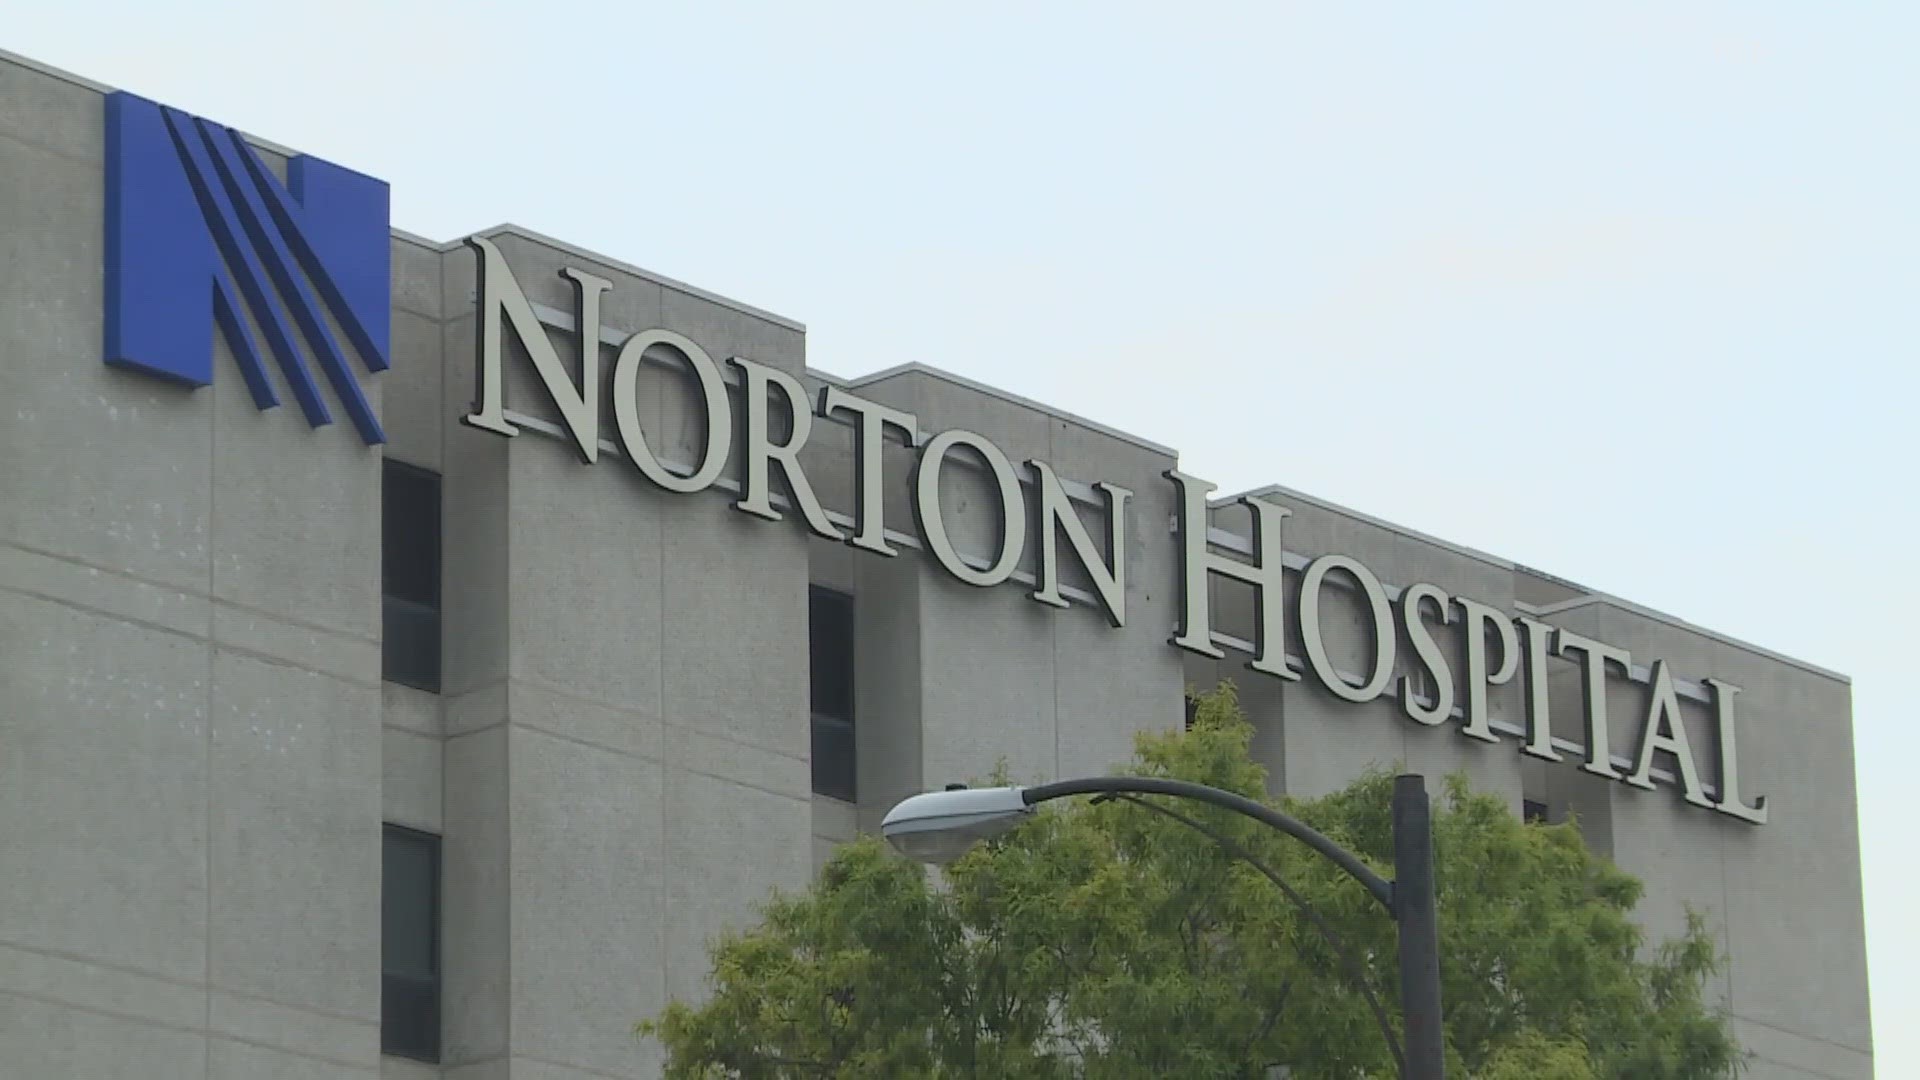 In the lawsuit, the patient claims that Norton failed to secure and safeguard hers and around 2.5 million other people's personal information.